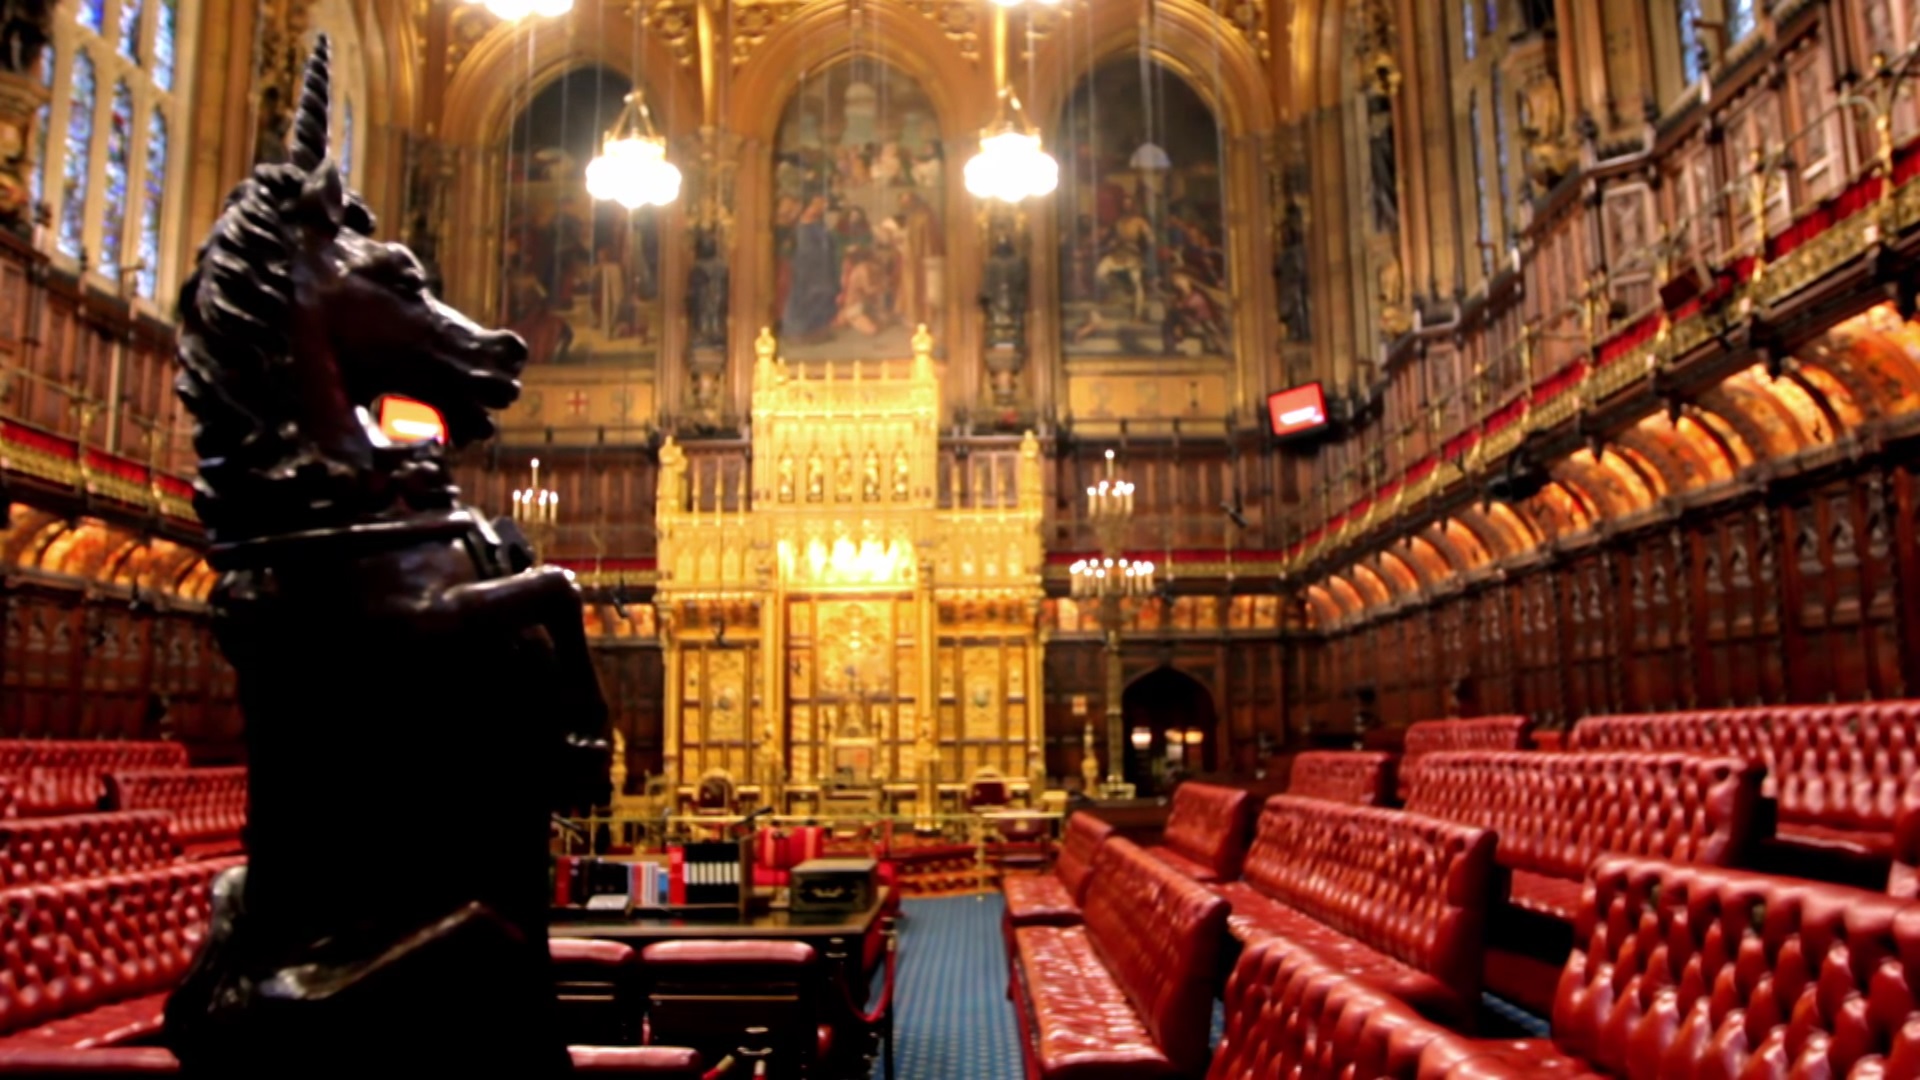 Lording a better democracy – House of Lords reform.